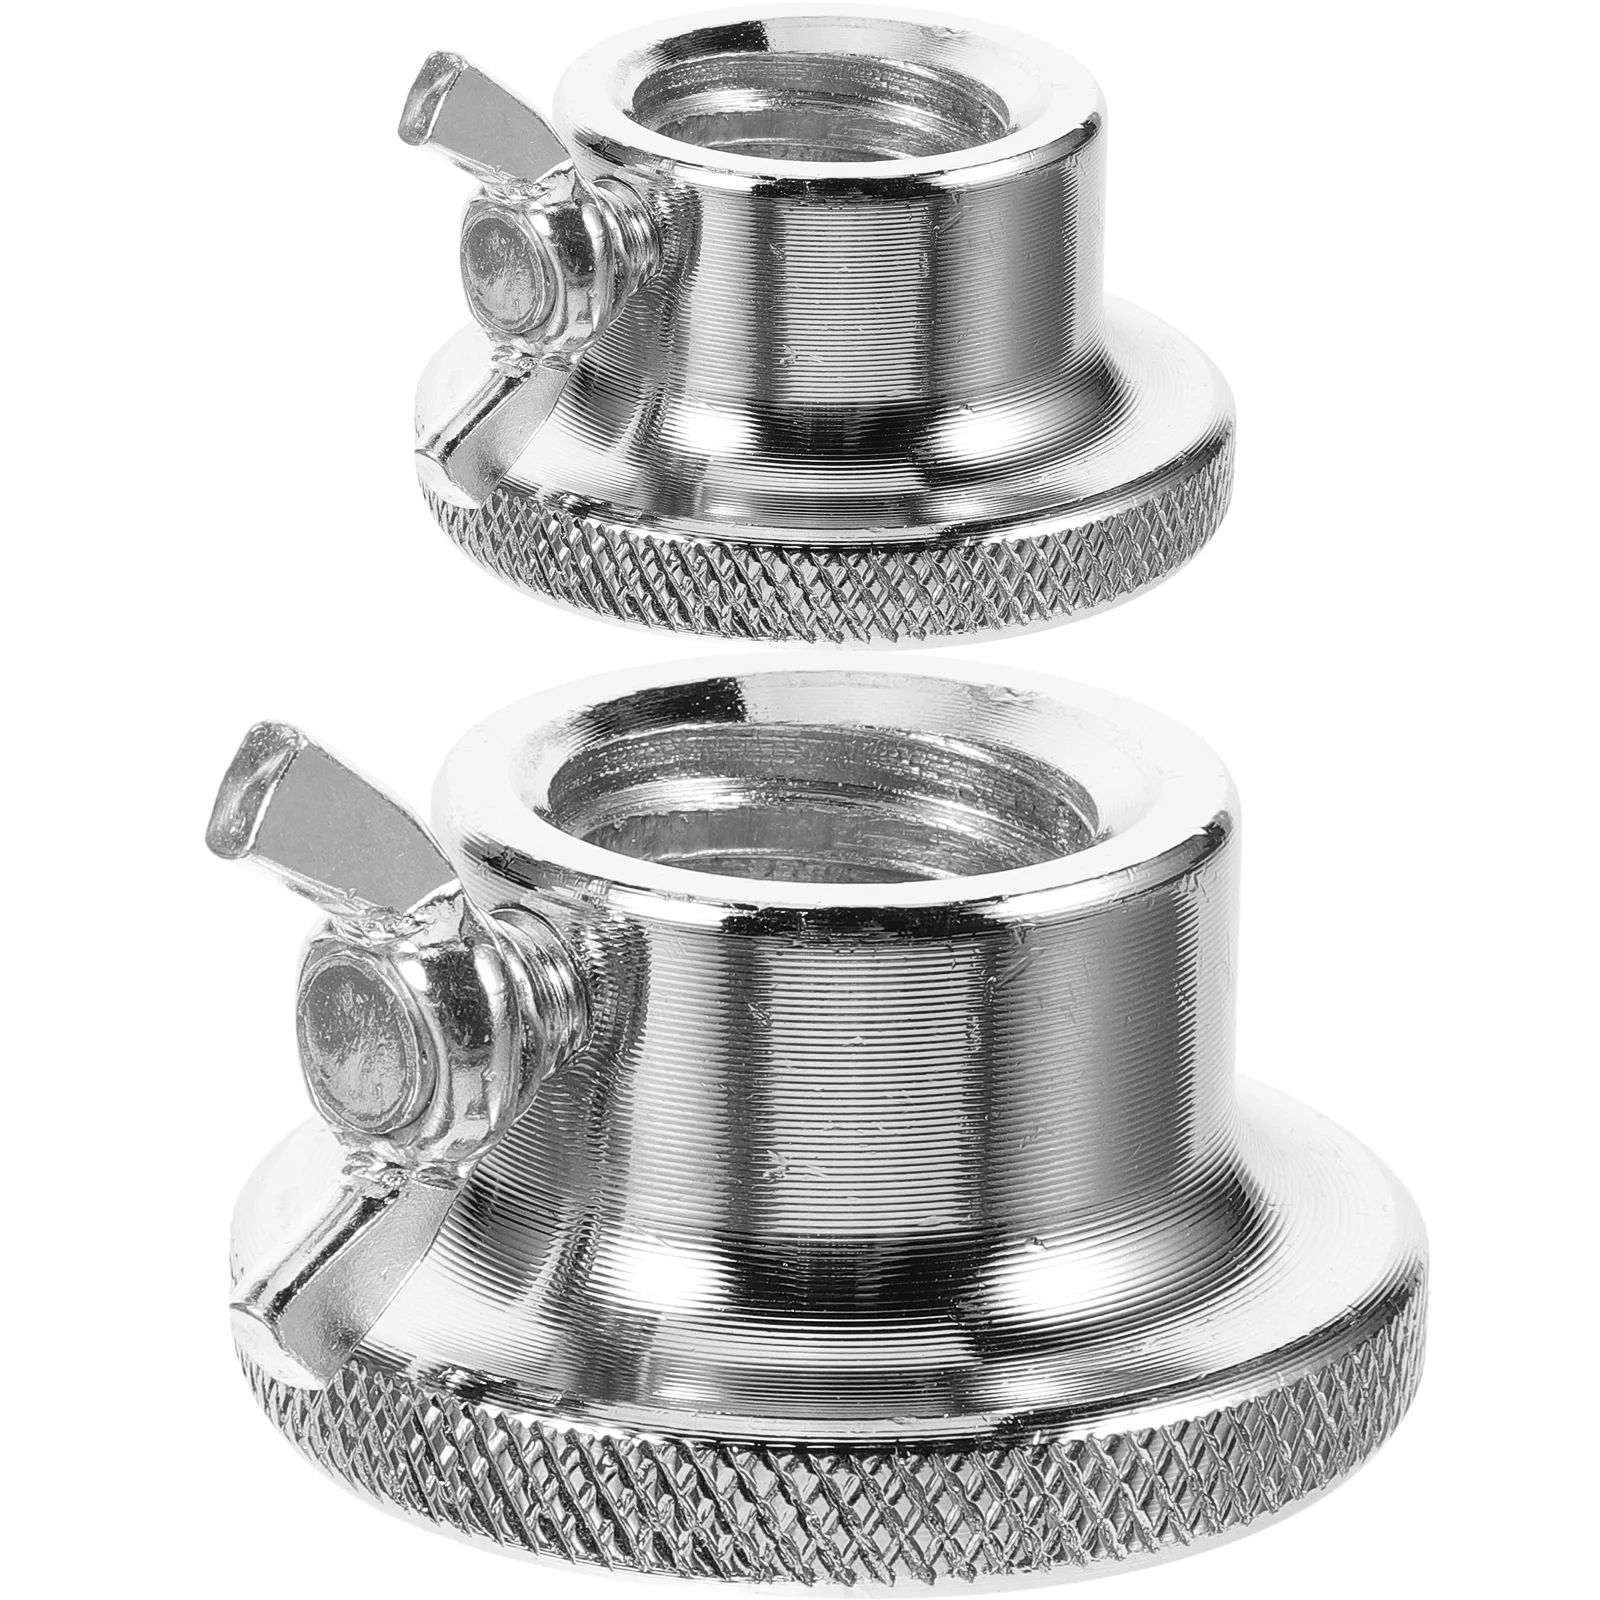 

2pcs Spinlock Collars Dumbbell Screw Clamps Dumbbell Bar Spinlock for Barbell Weight Lifting Silver